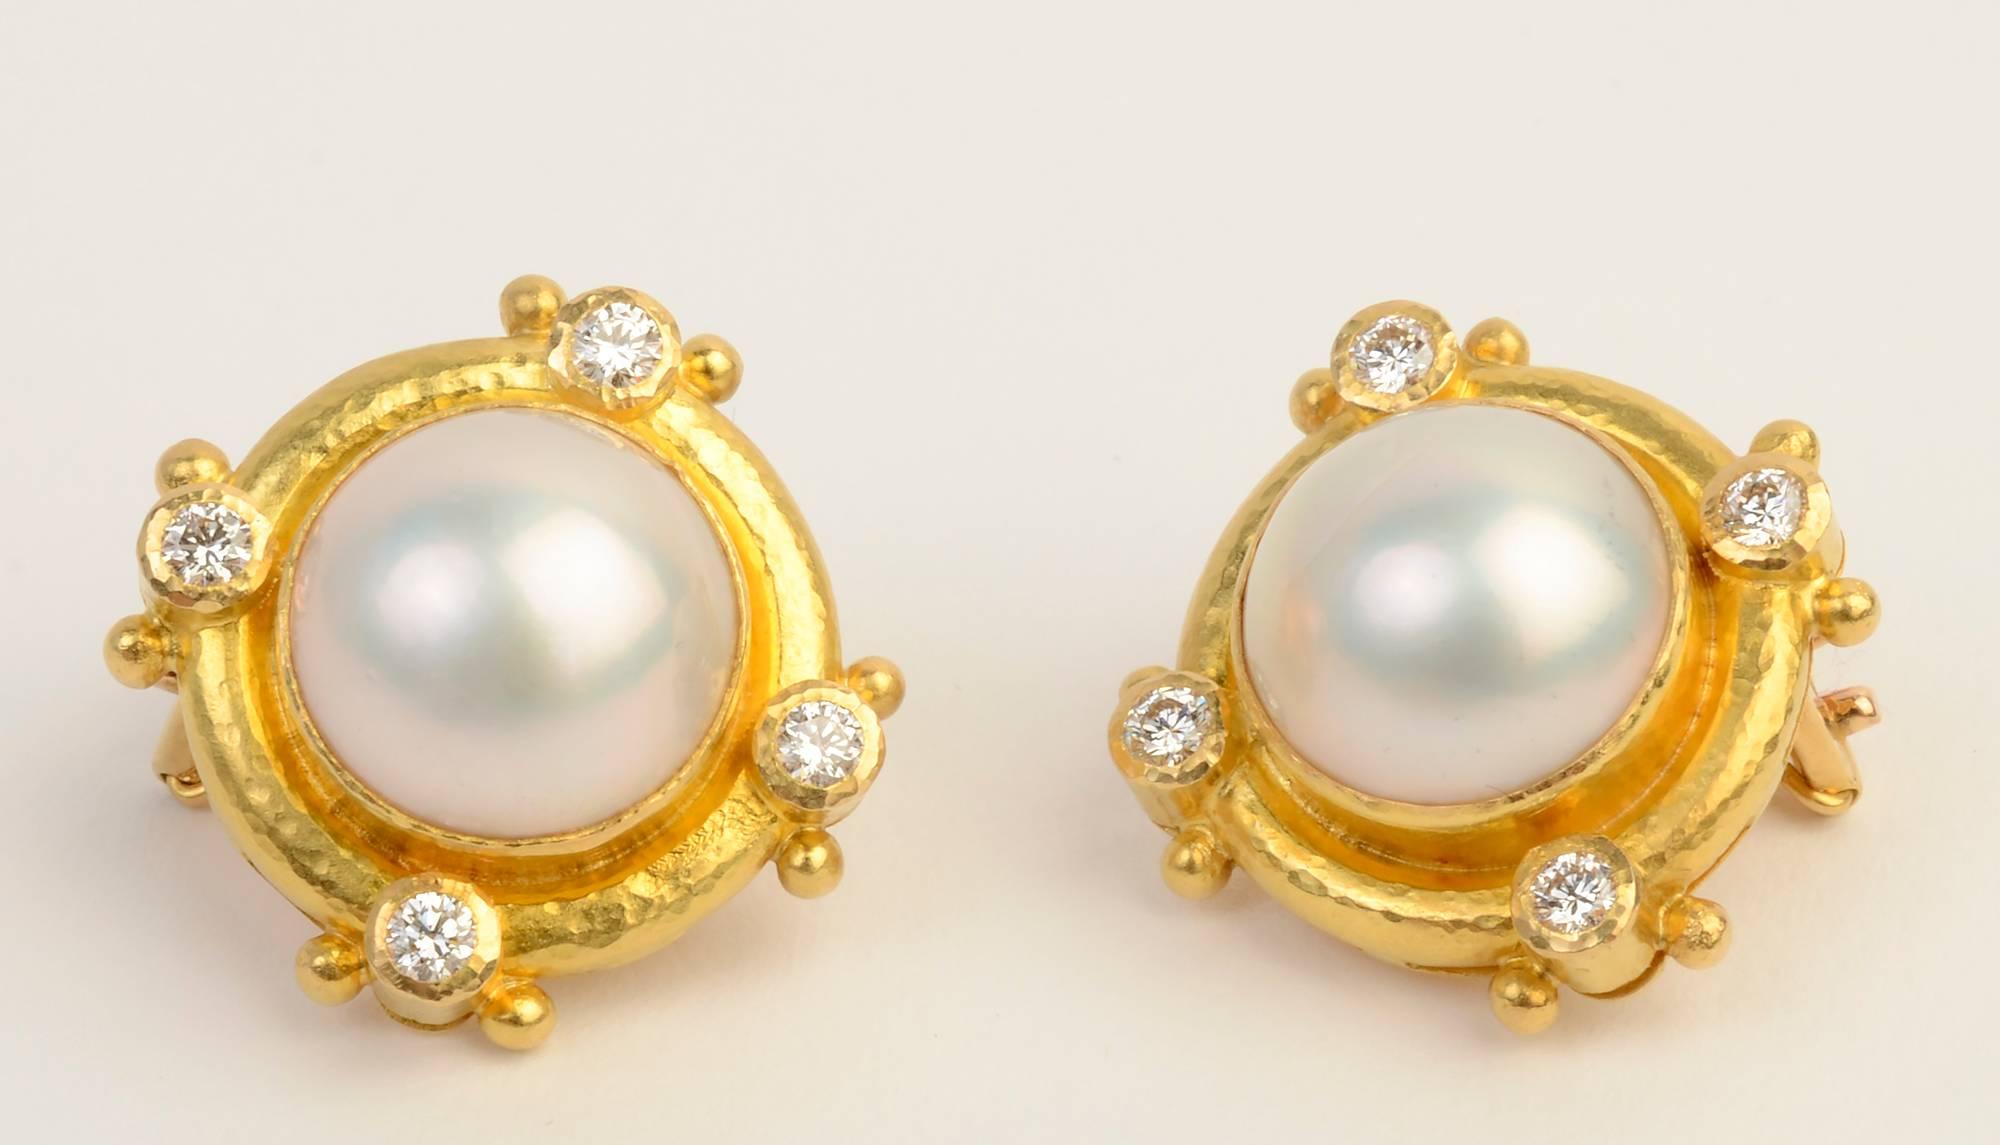 Elegant earrings by Elizabeth Locke with mabe pearls measuring 12.6 mm. Each is surrounded by four diamonds. They are set in the hammered gold finish for which Locke is known. Backs are posts and clips. Made of 19 karat gold. Accompanied by original